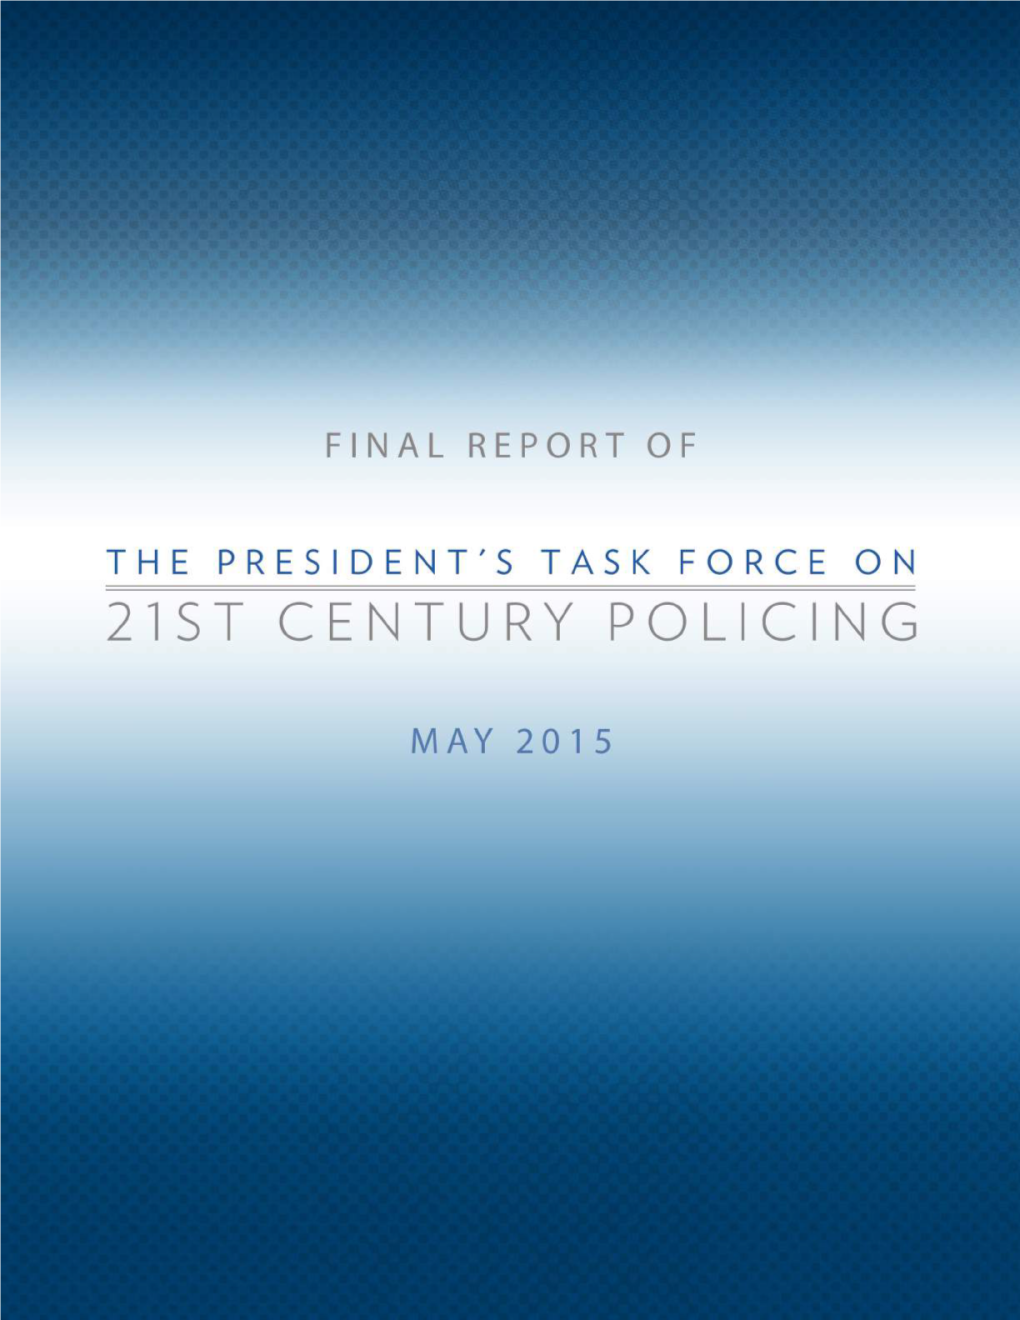 The Final Report of the President's Task Force on 21St